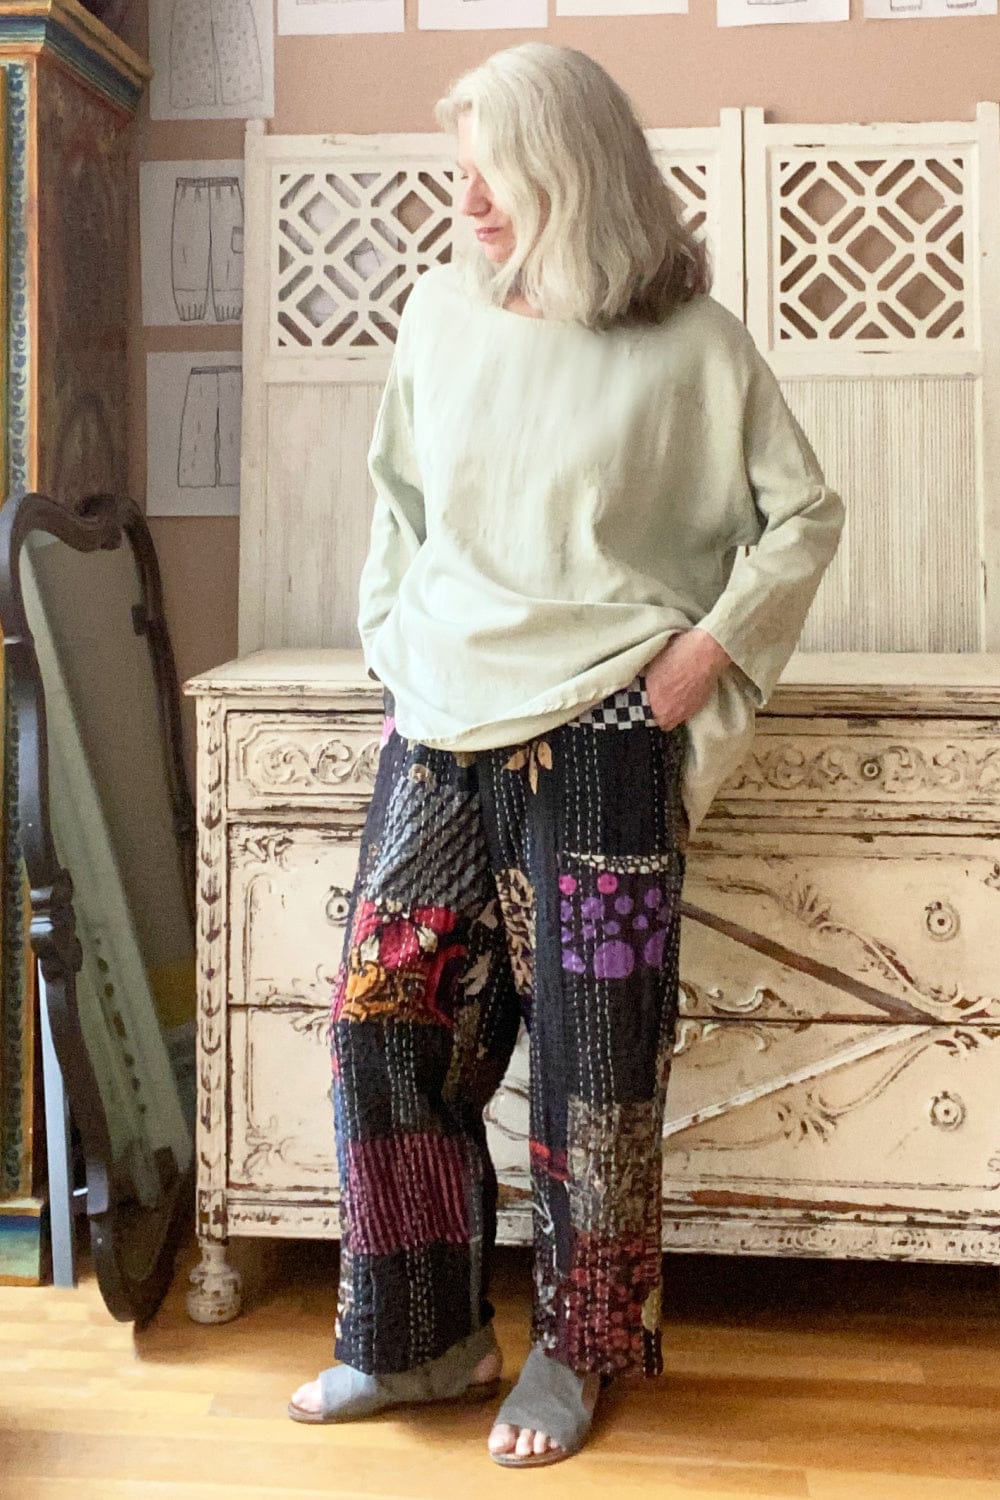 Fun patchwork kantha pants with lots of prints and colors on a black background.